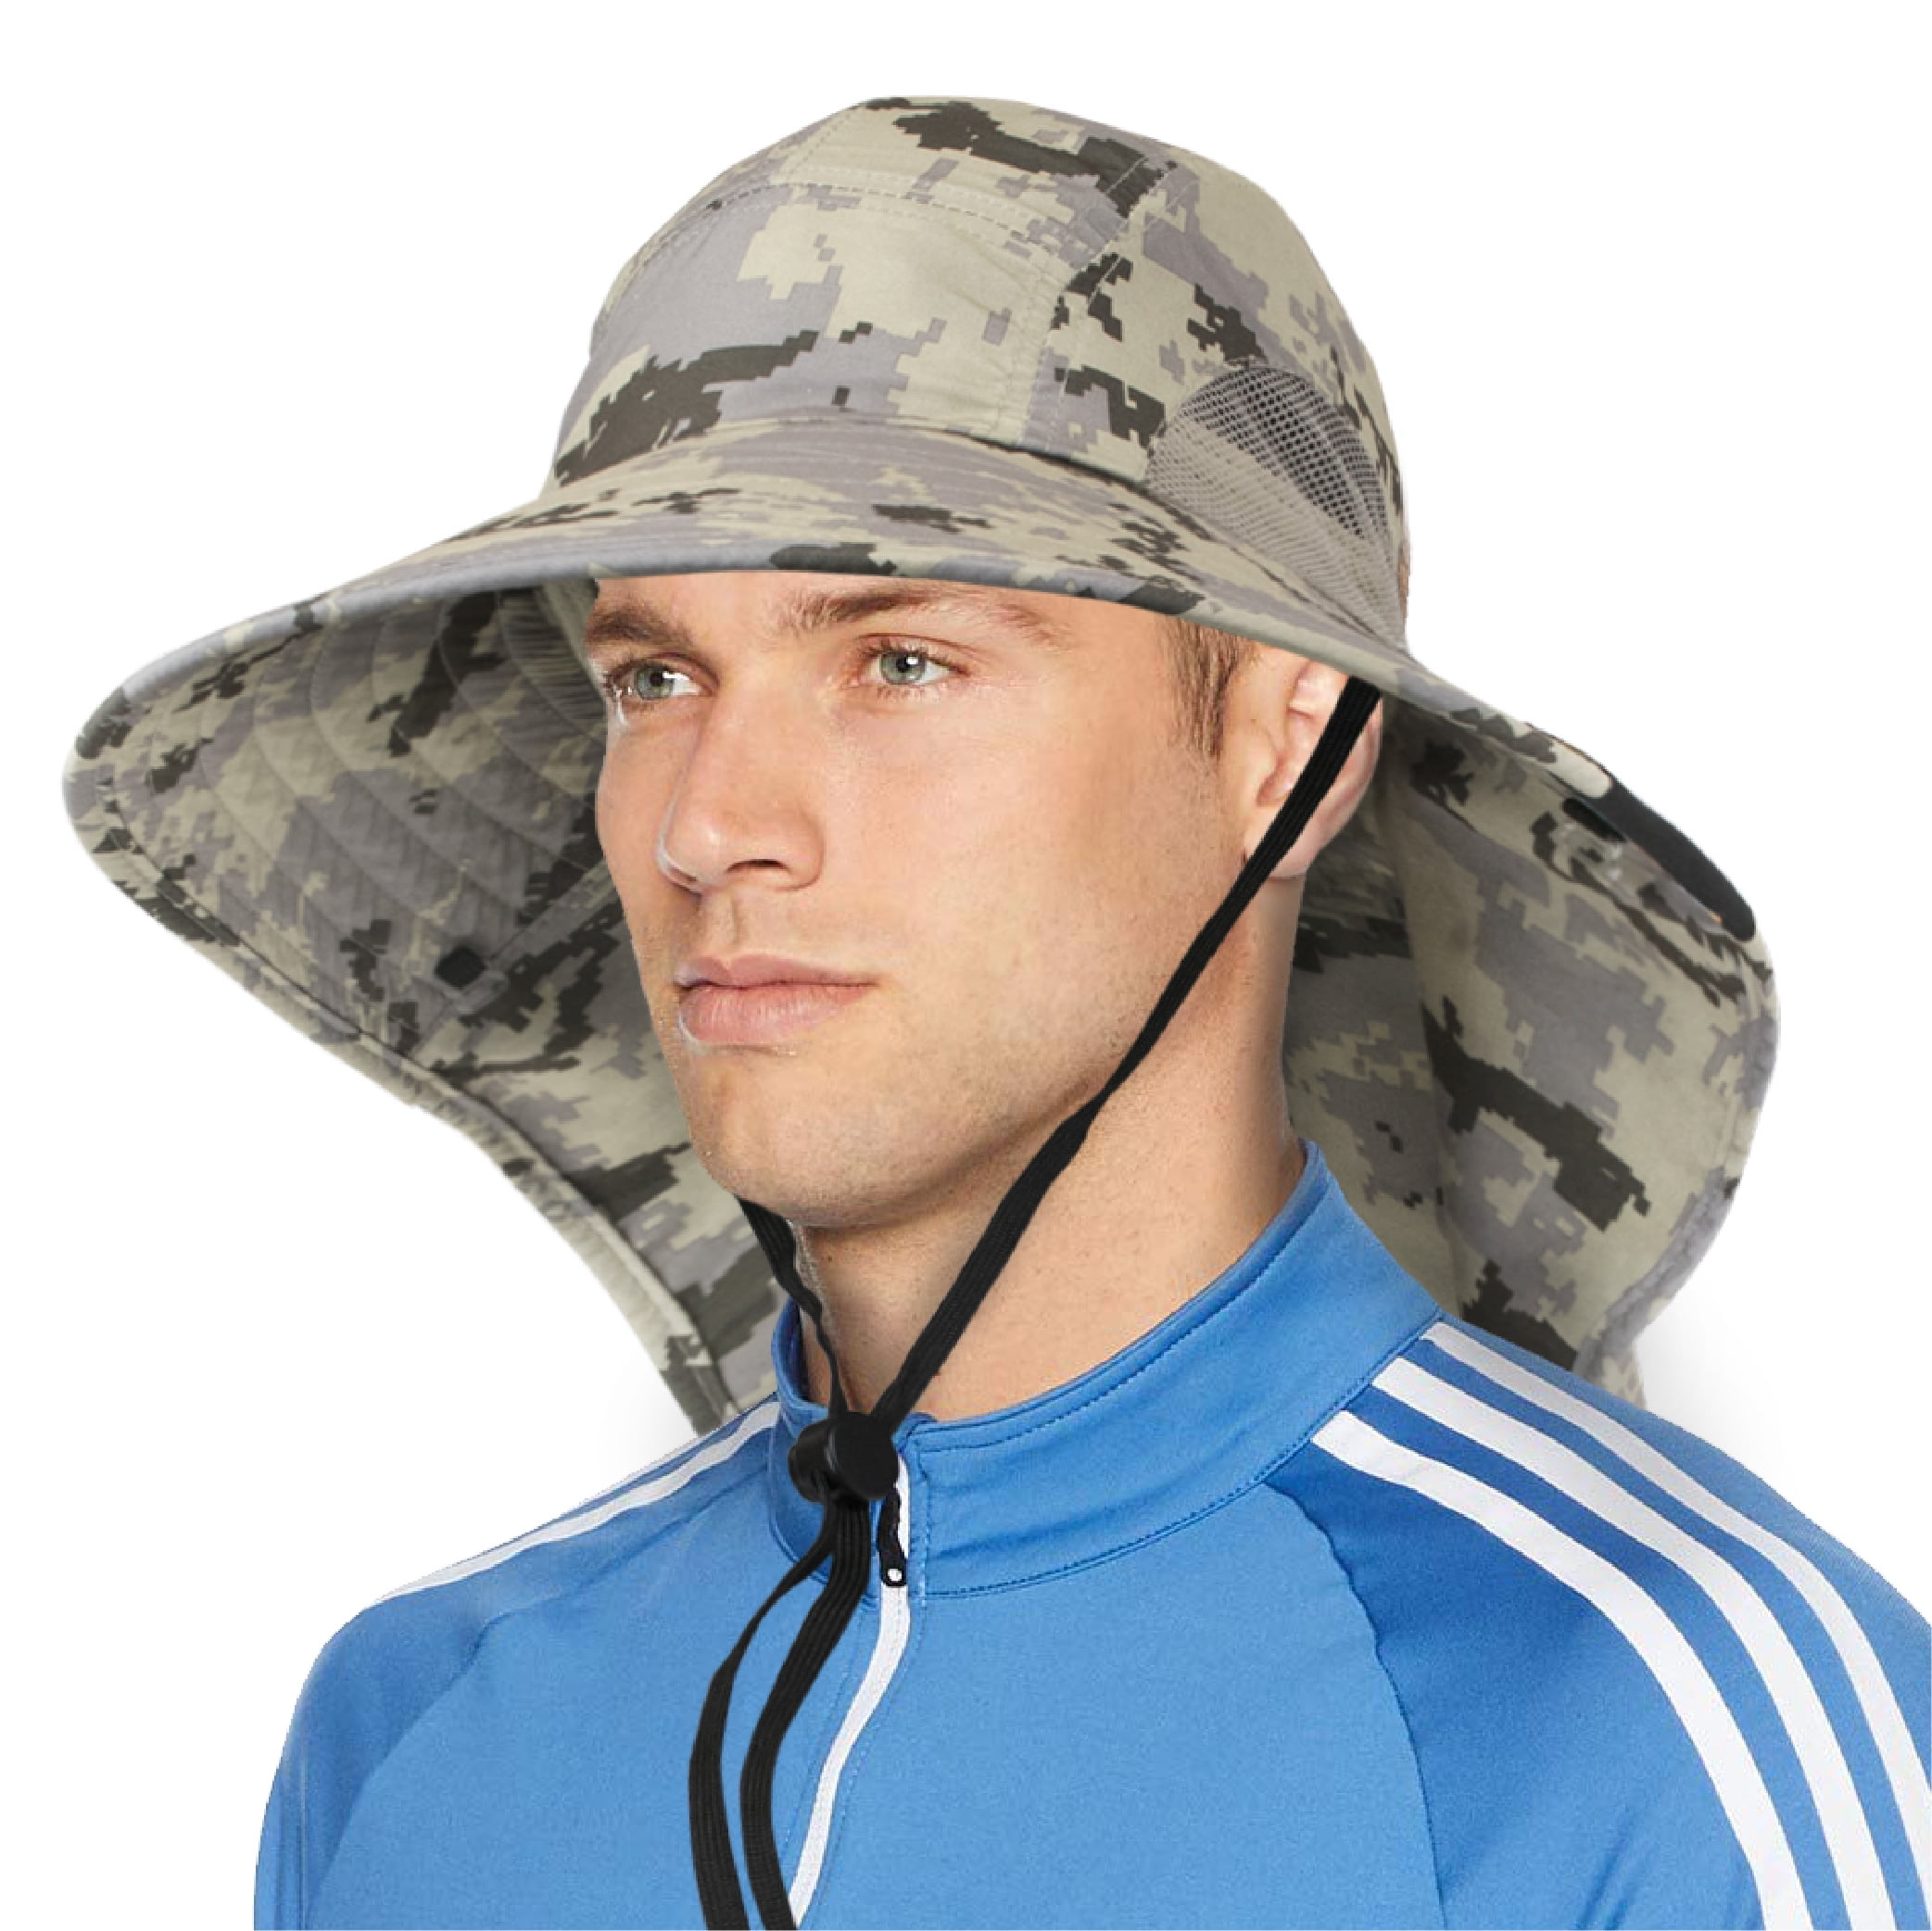 COSMOING Breathable Fishing Hat Wide Brim and Safari Cap with Sun